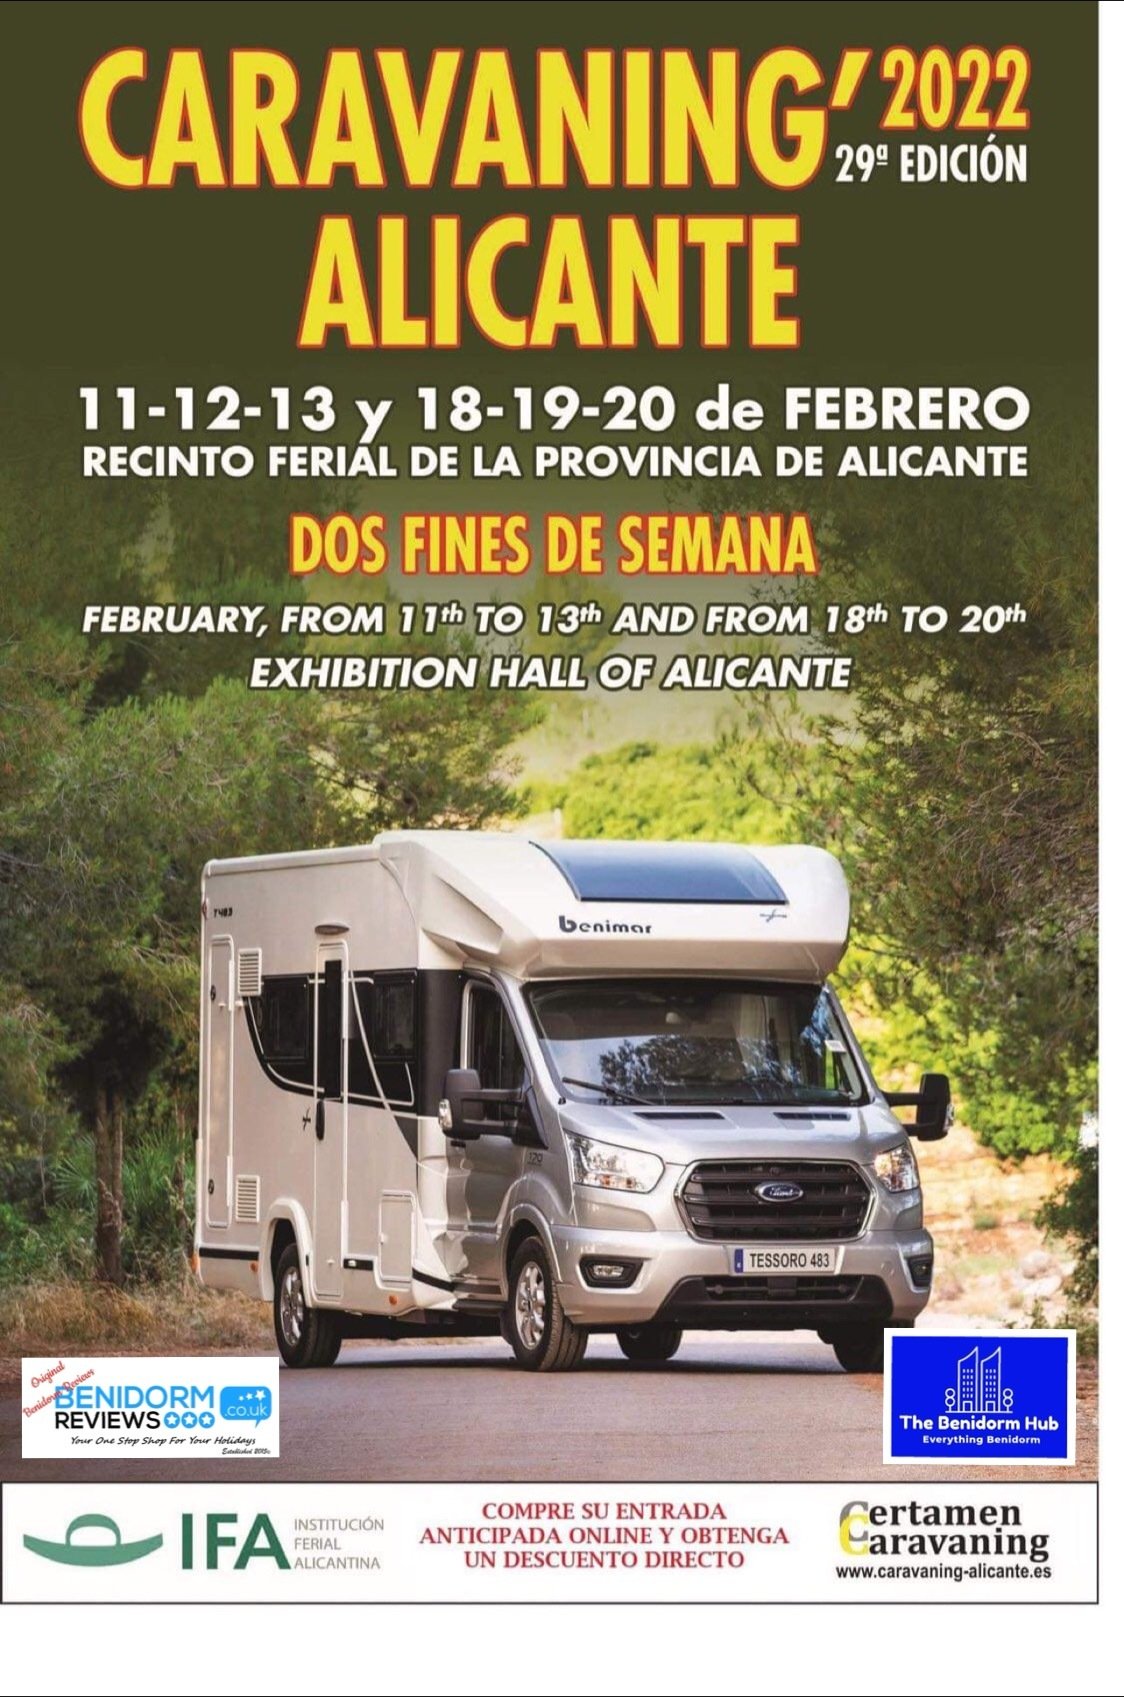 Caravaning Alicante 2022 kicks off - 29th Edition We are working to carry out the 29th edition of Certamen Caravaning 2022, the most important monographic fair of the Levante-South and the second at national level, with more enthusiasm and effort than in previous years if possible.   The date chosen for its celebration will be from the 11th to the 13th and from the 18th to the 20th of February 2022.   After the forced pause caused by the COVID health emergency, we return with more energy and desire to show you the latest developments in the sector: motorhomes, caravans, campers, residential modules, mobile homes, leisure and free time, convertible trailers, accessories, camping articles and much, much more.    Our wish is to continue to offer you the best possible service and to ensure that you continue to enjoy the advantages of caravanning in an environment of freedom and safety.   We will keep you informed in the near future.